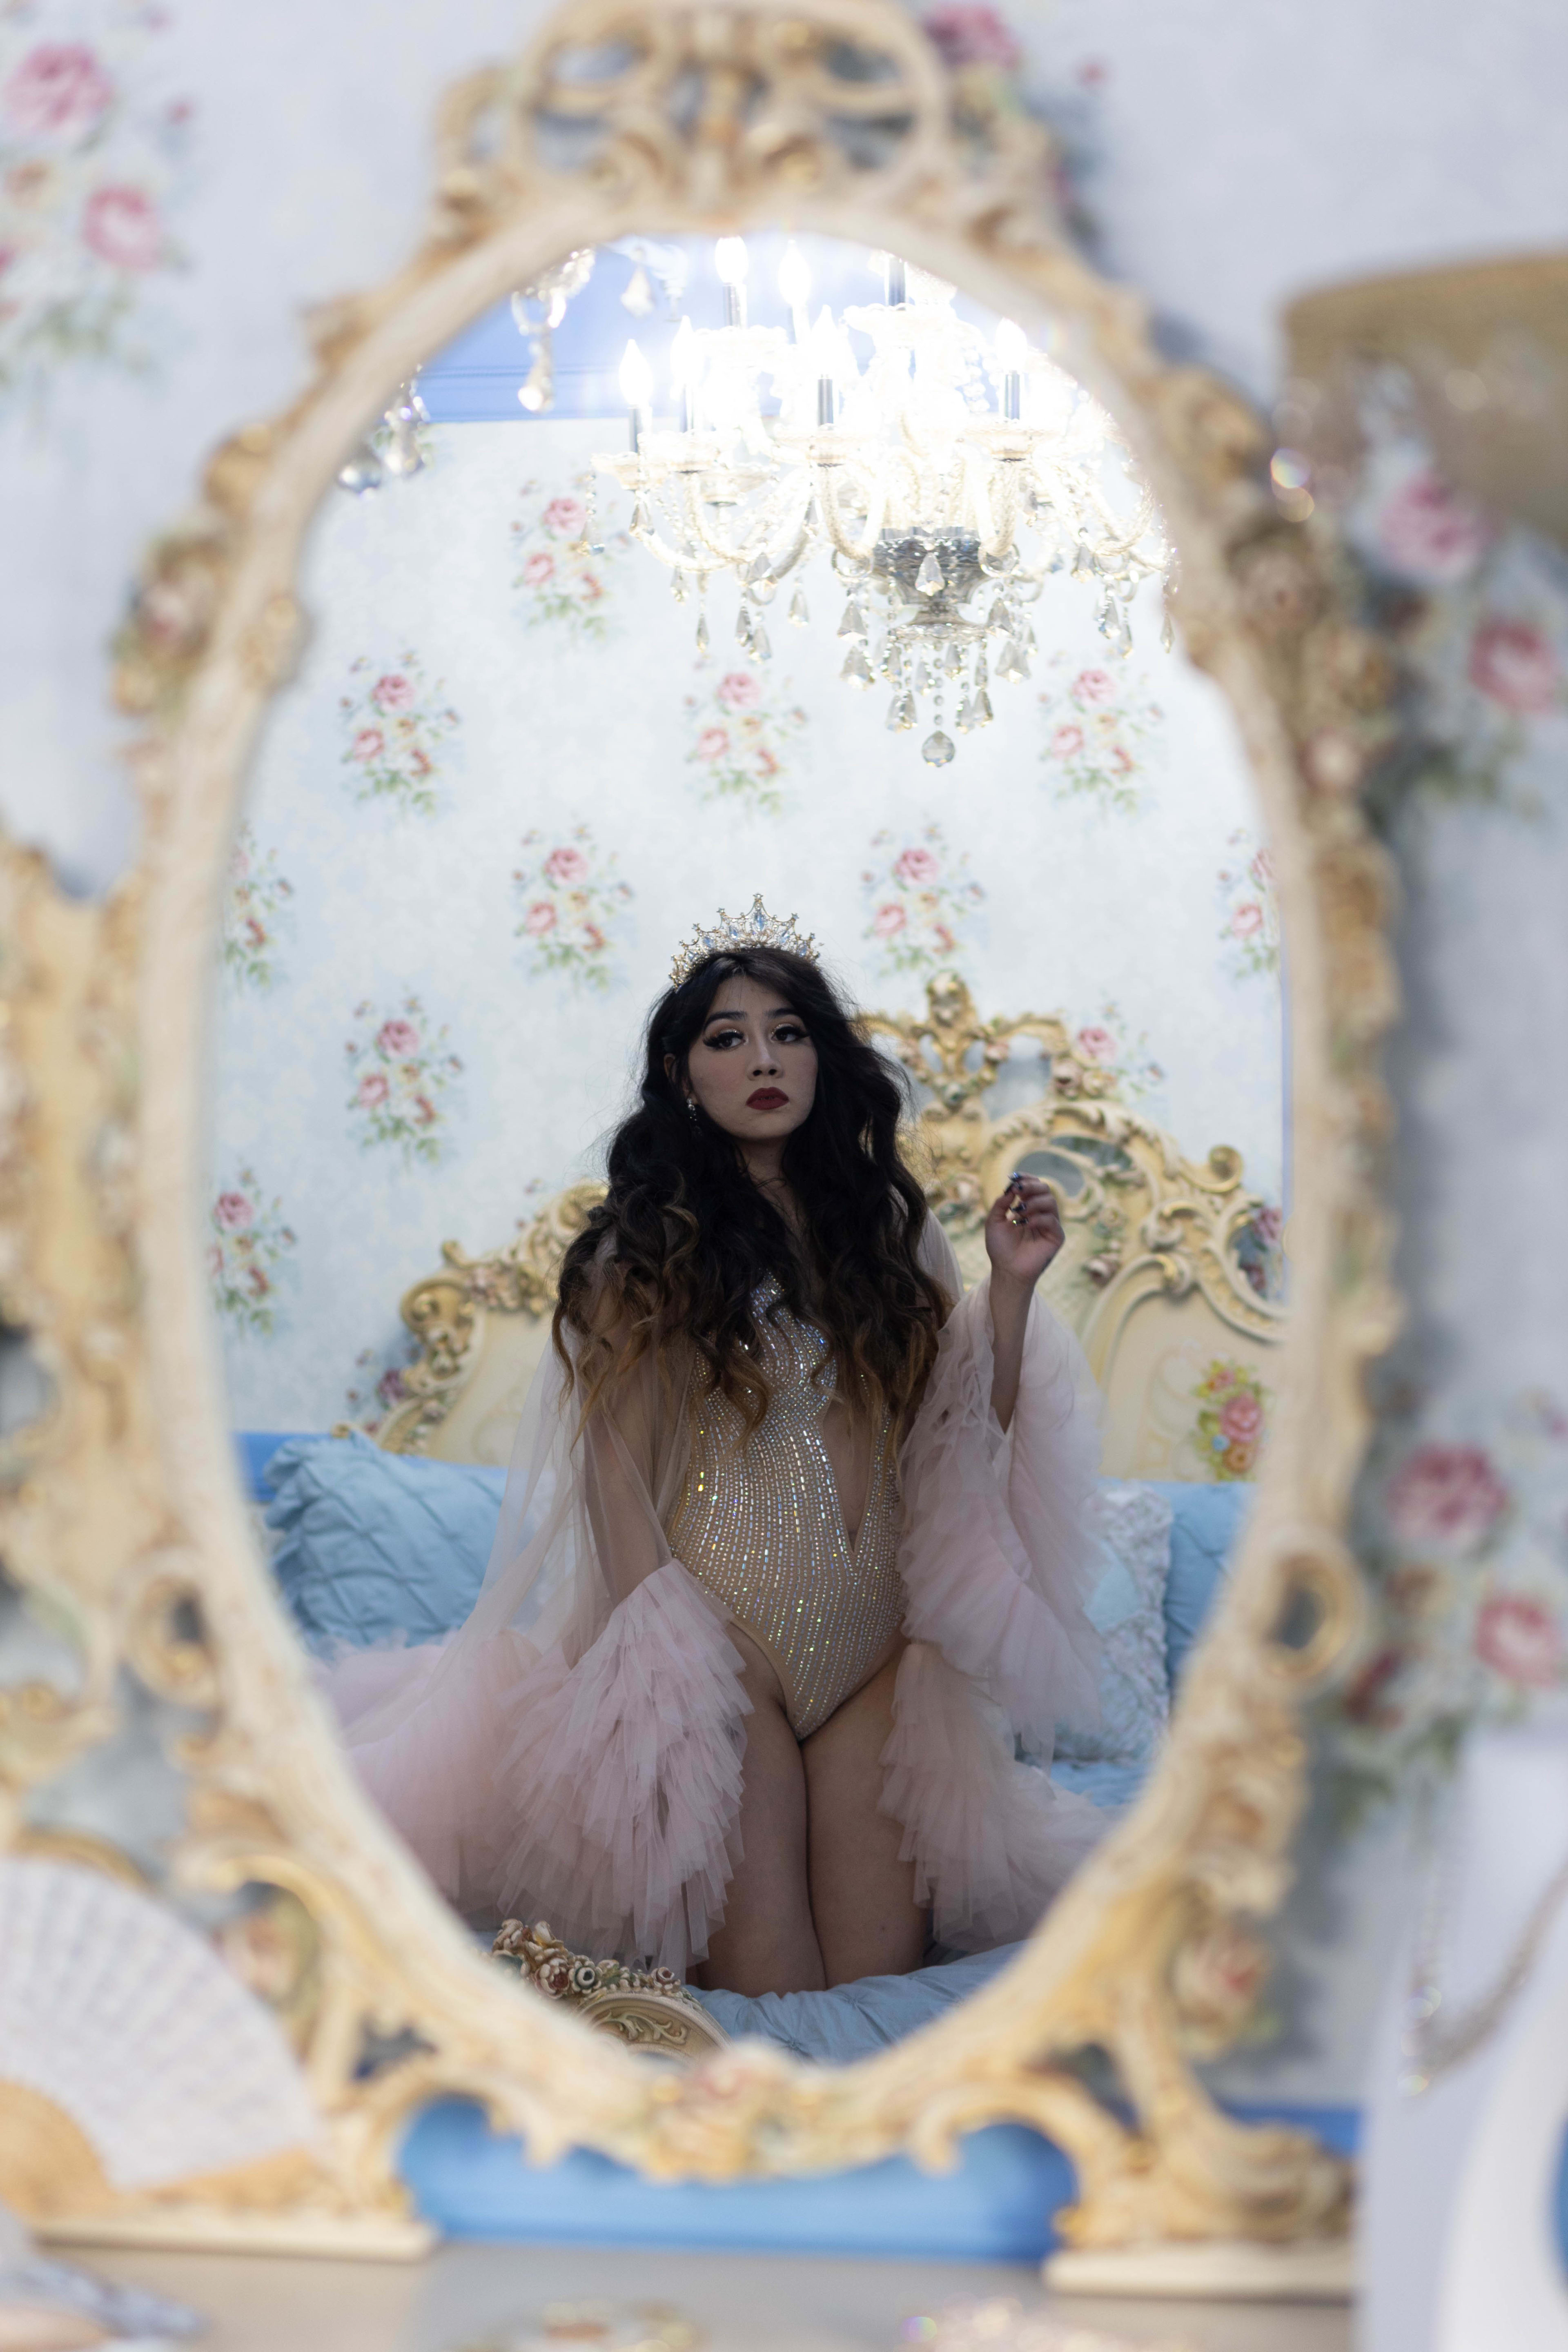 A woman dressed in princess-themed clothing posing for a photoshoot in front of a gold-framed mirror.